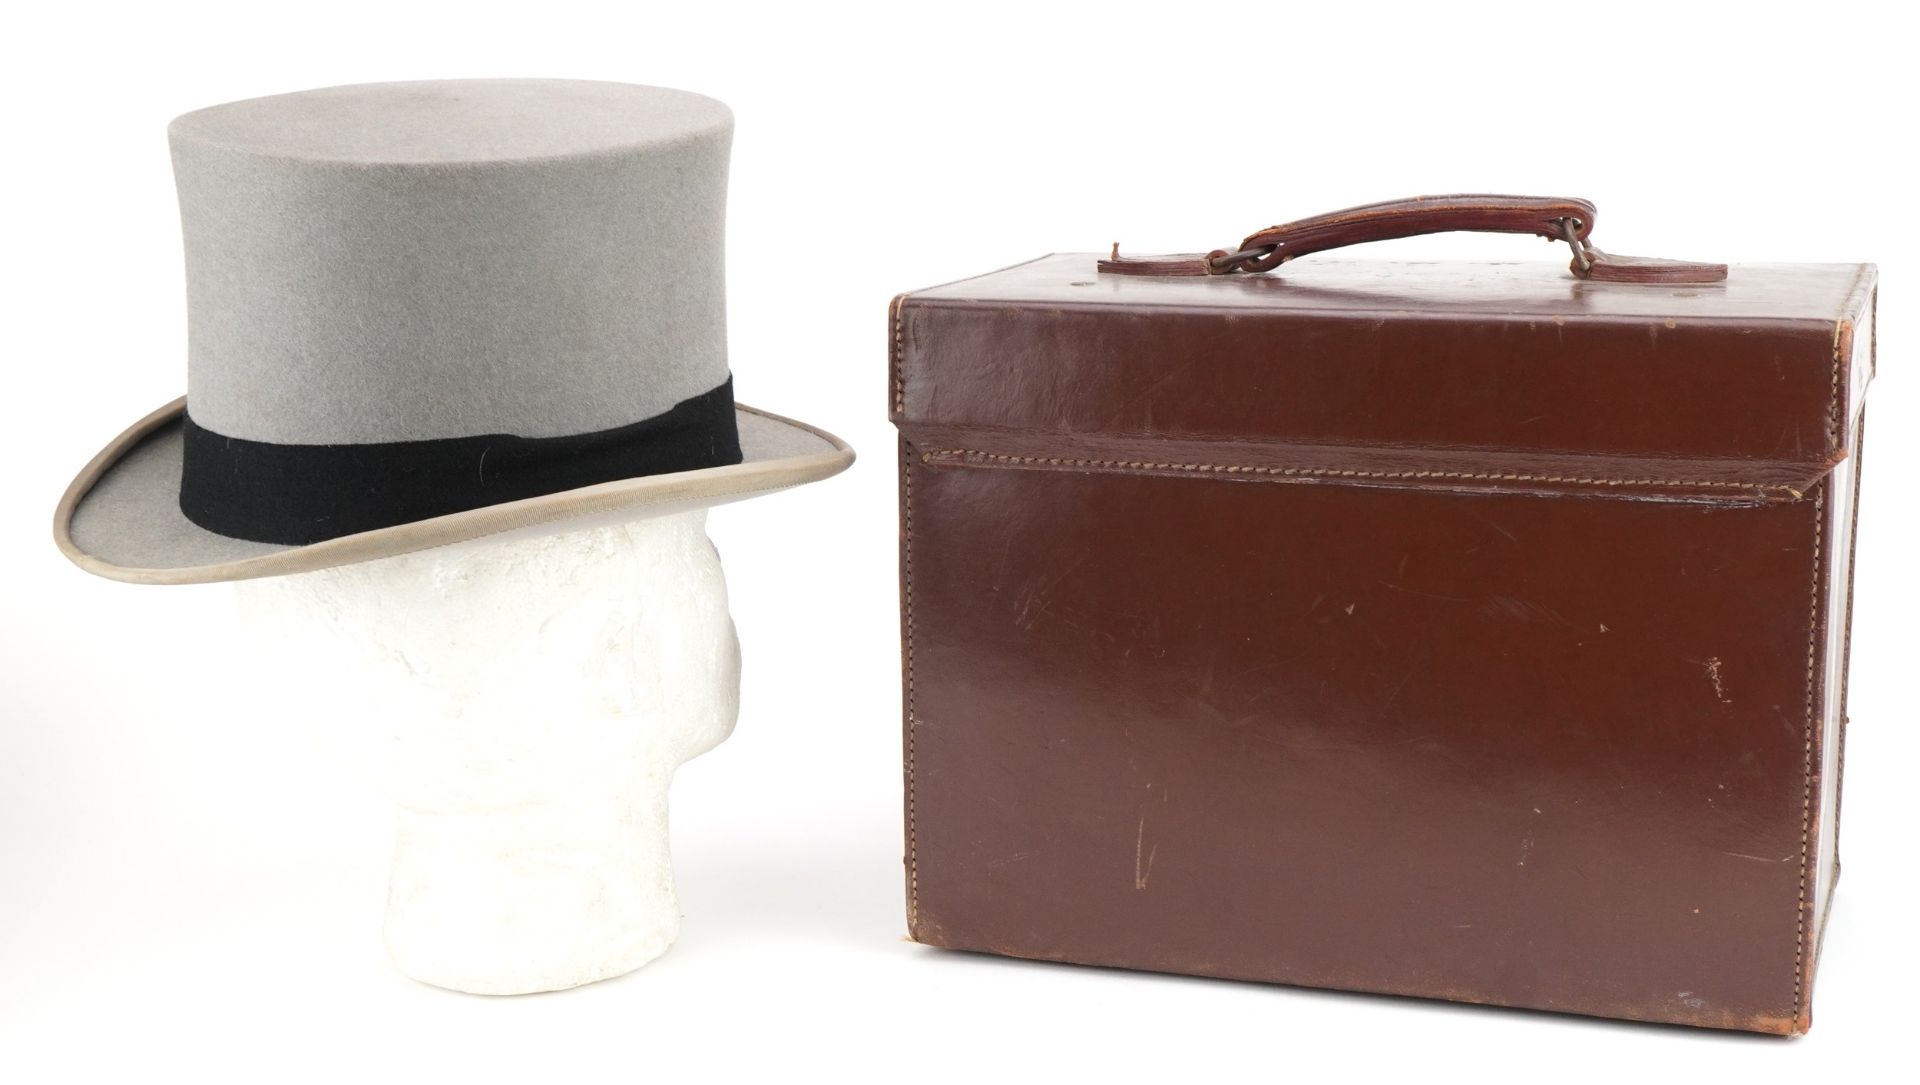 Scott & Co top hat housed in a brown leatherette travel box, the top hat interior size 21cm x 17cm : - Bild 2 aus 7